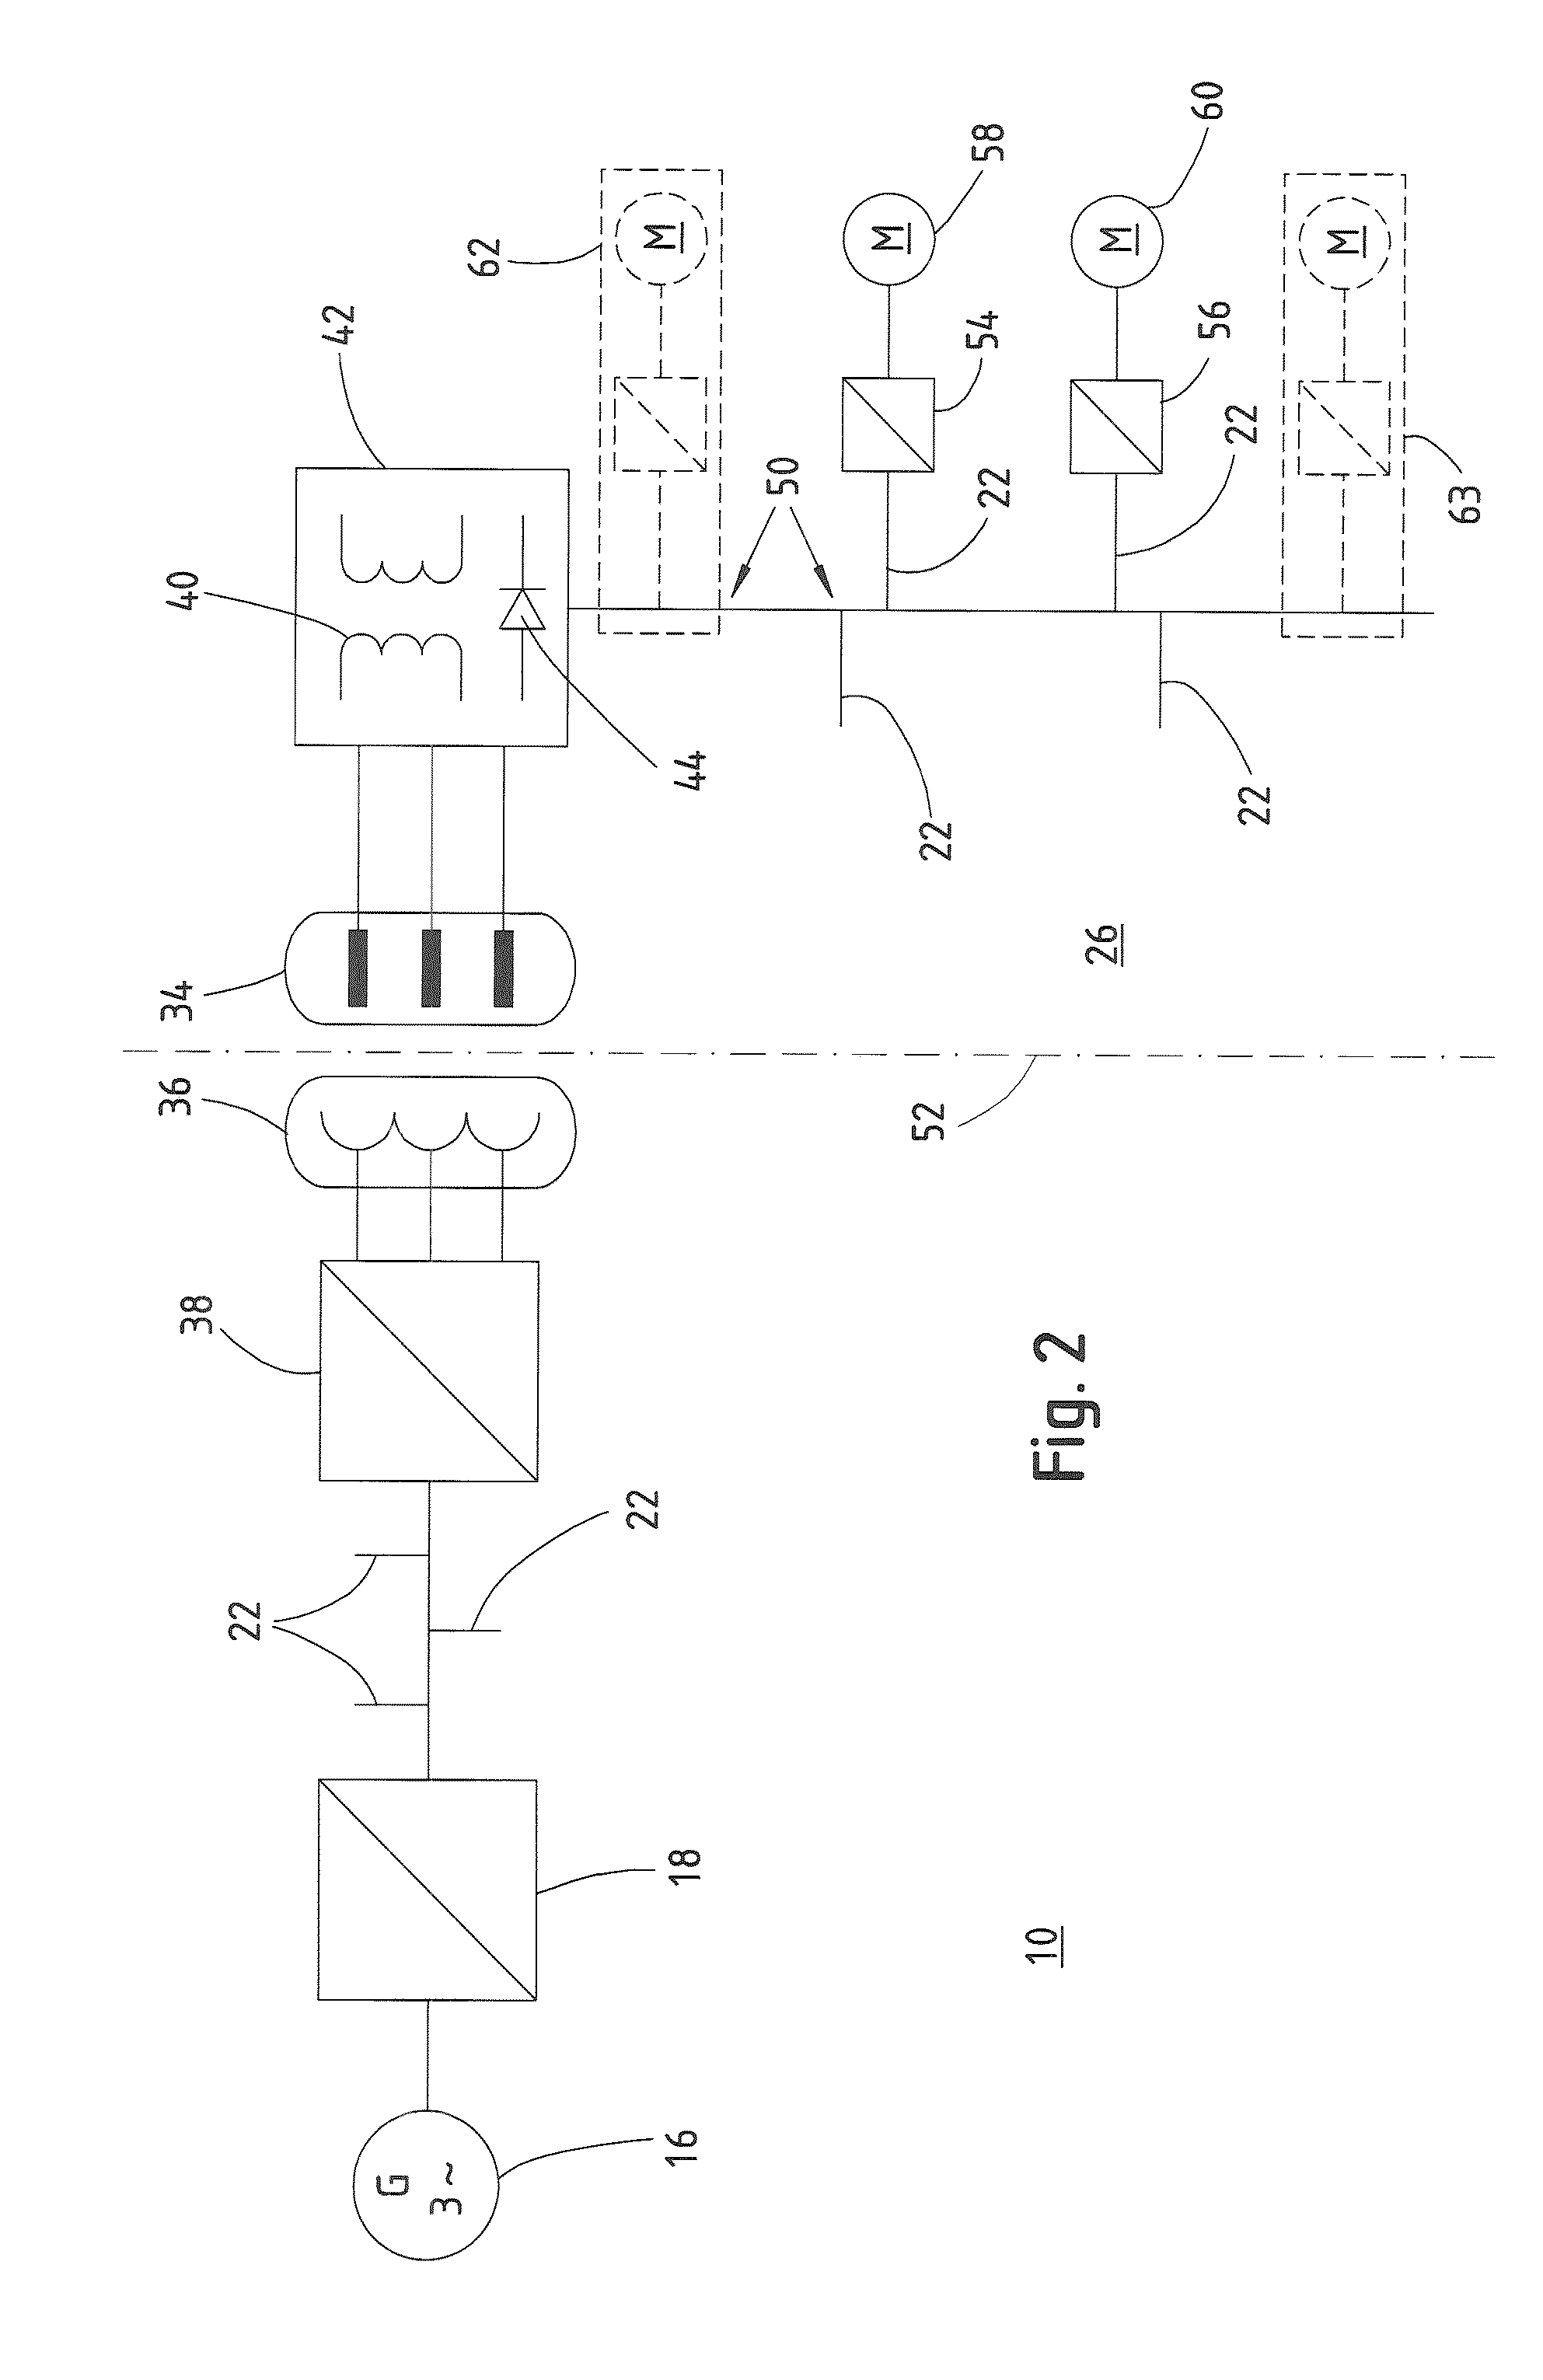 Electric system for providing electrical power for a vehicle and an implement